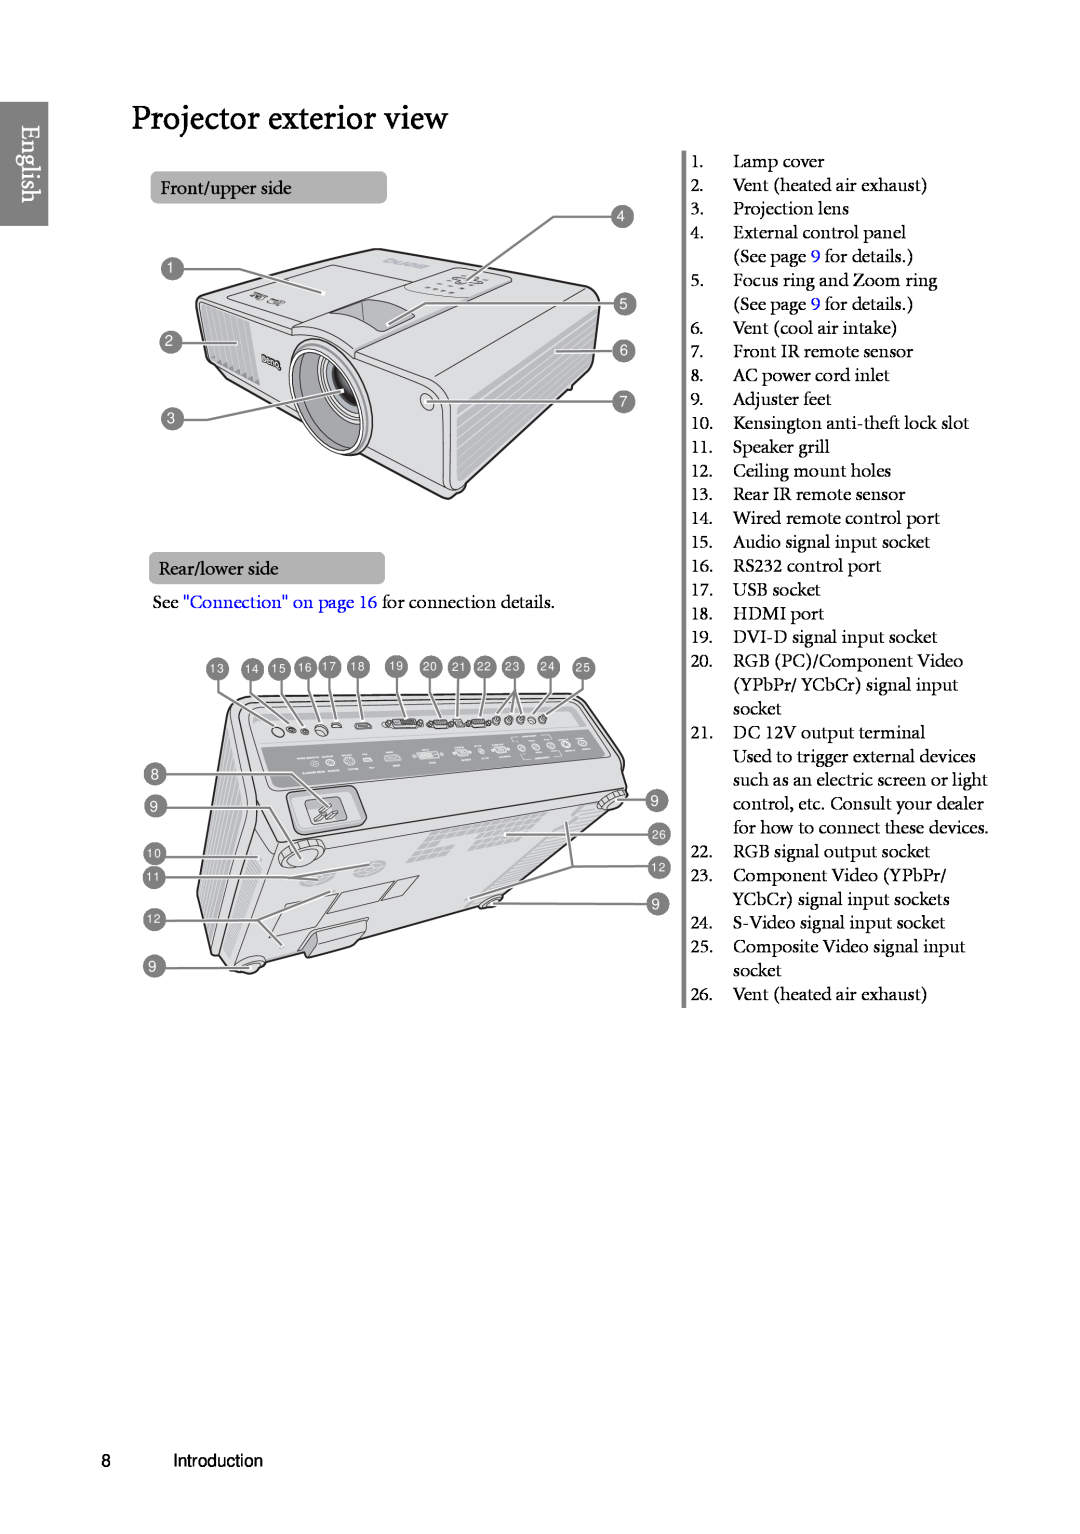 BenQ SP920 user manual Projector exterior view, English, Front/upper side, Rear/lower side 